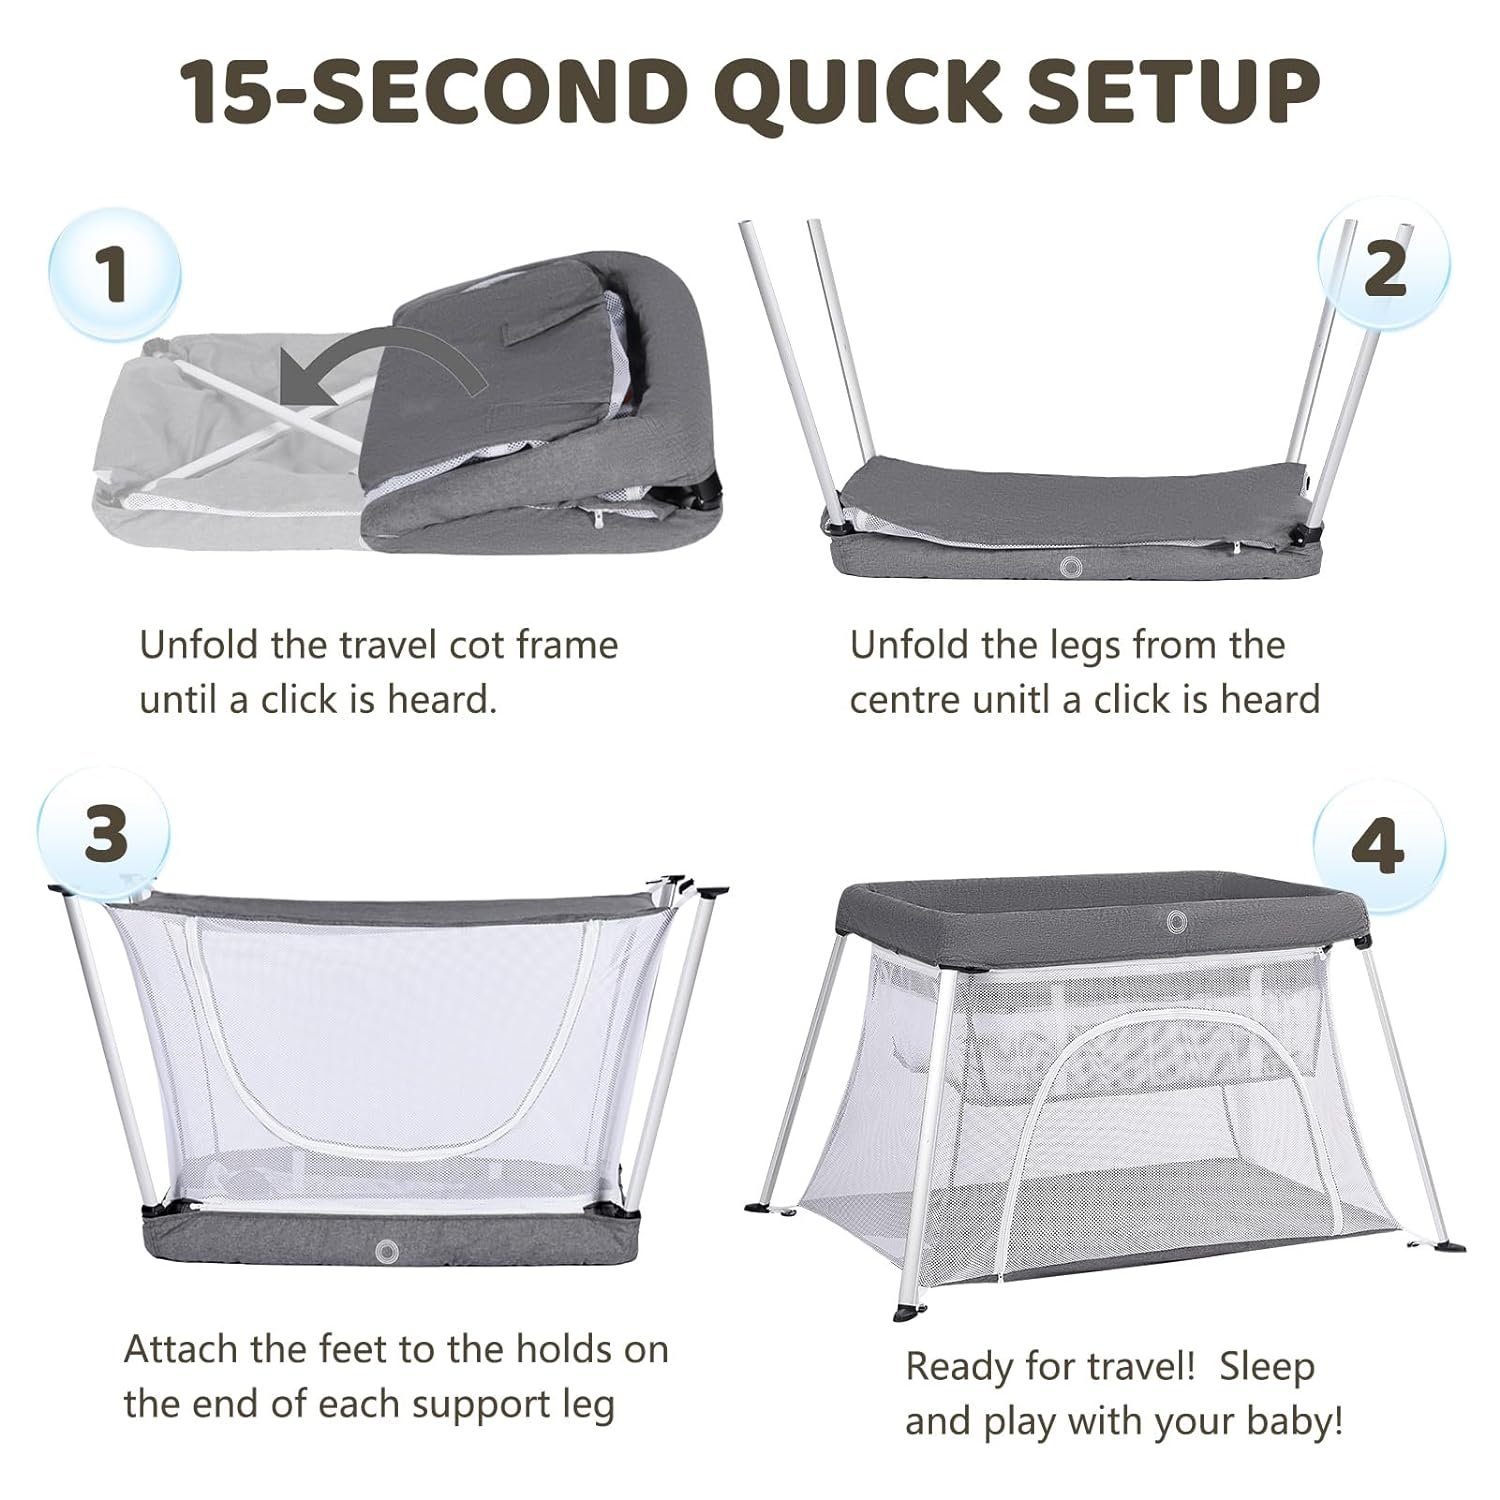 Portable Travel Crib for Baby Review